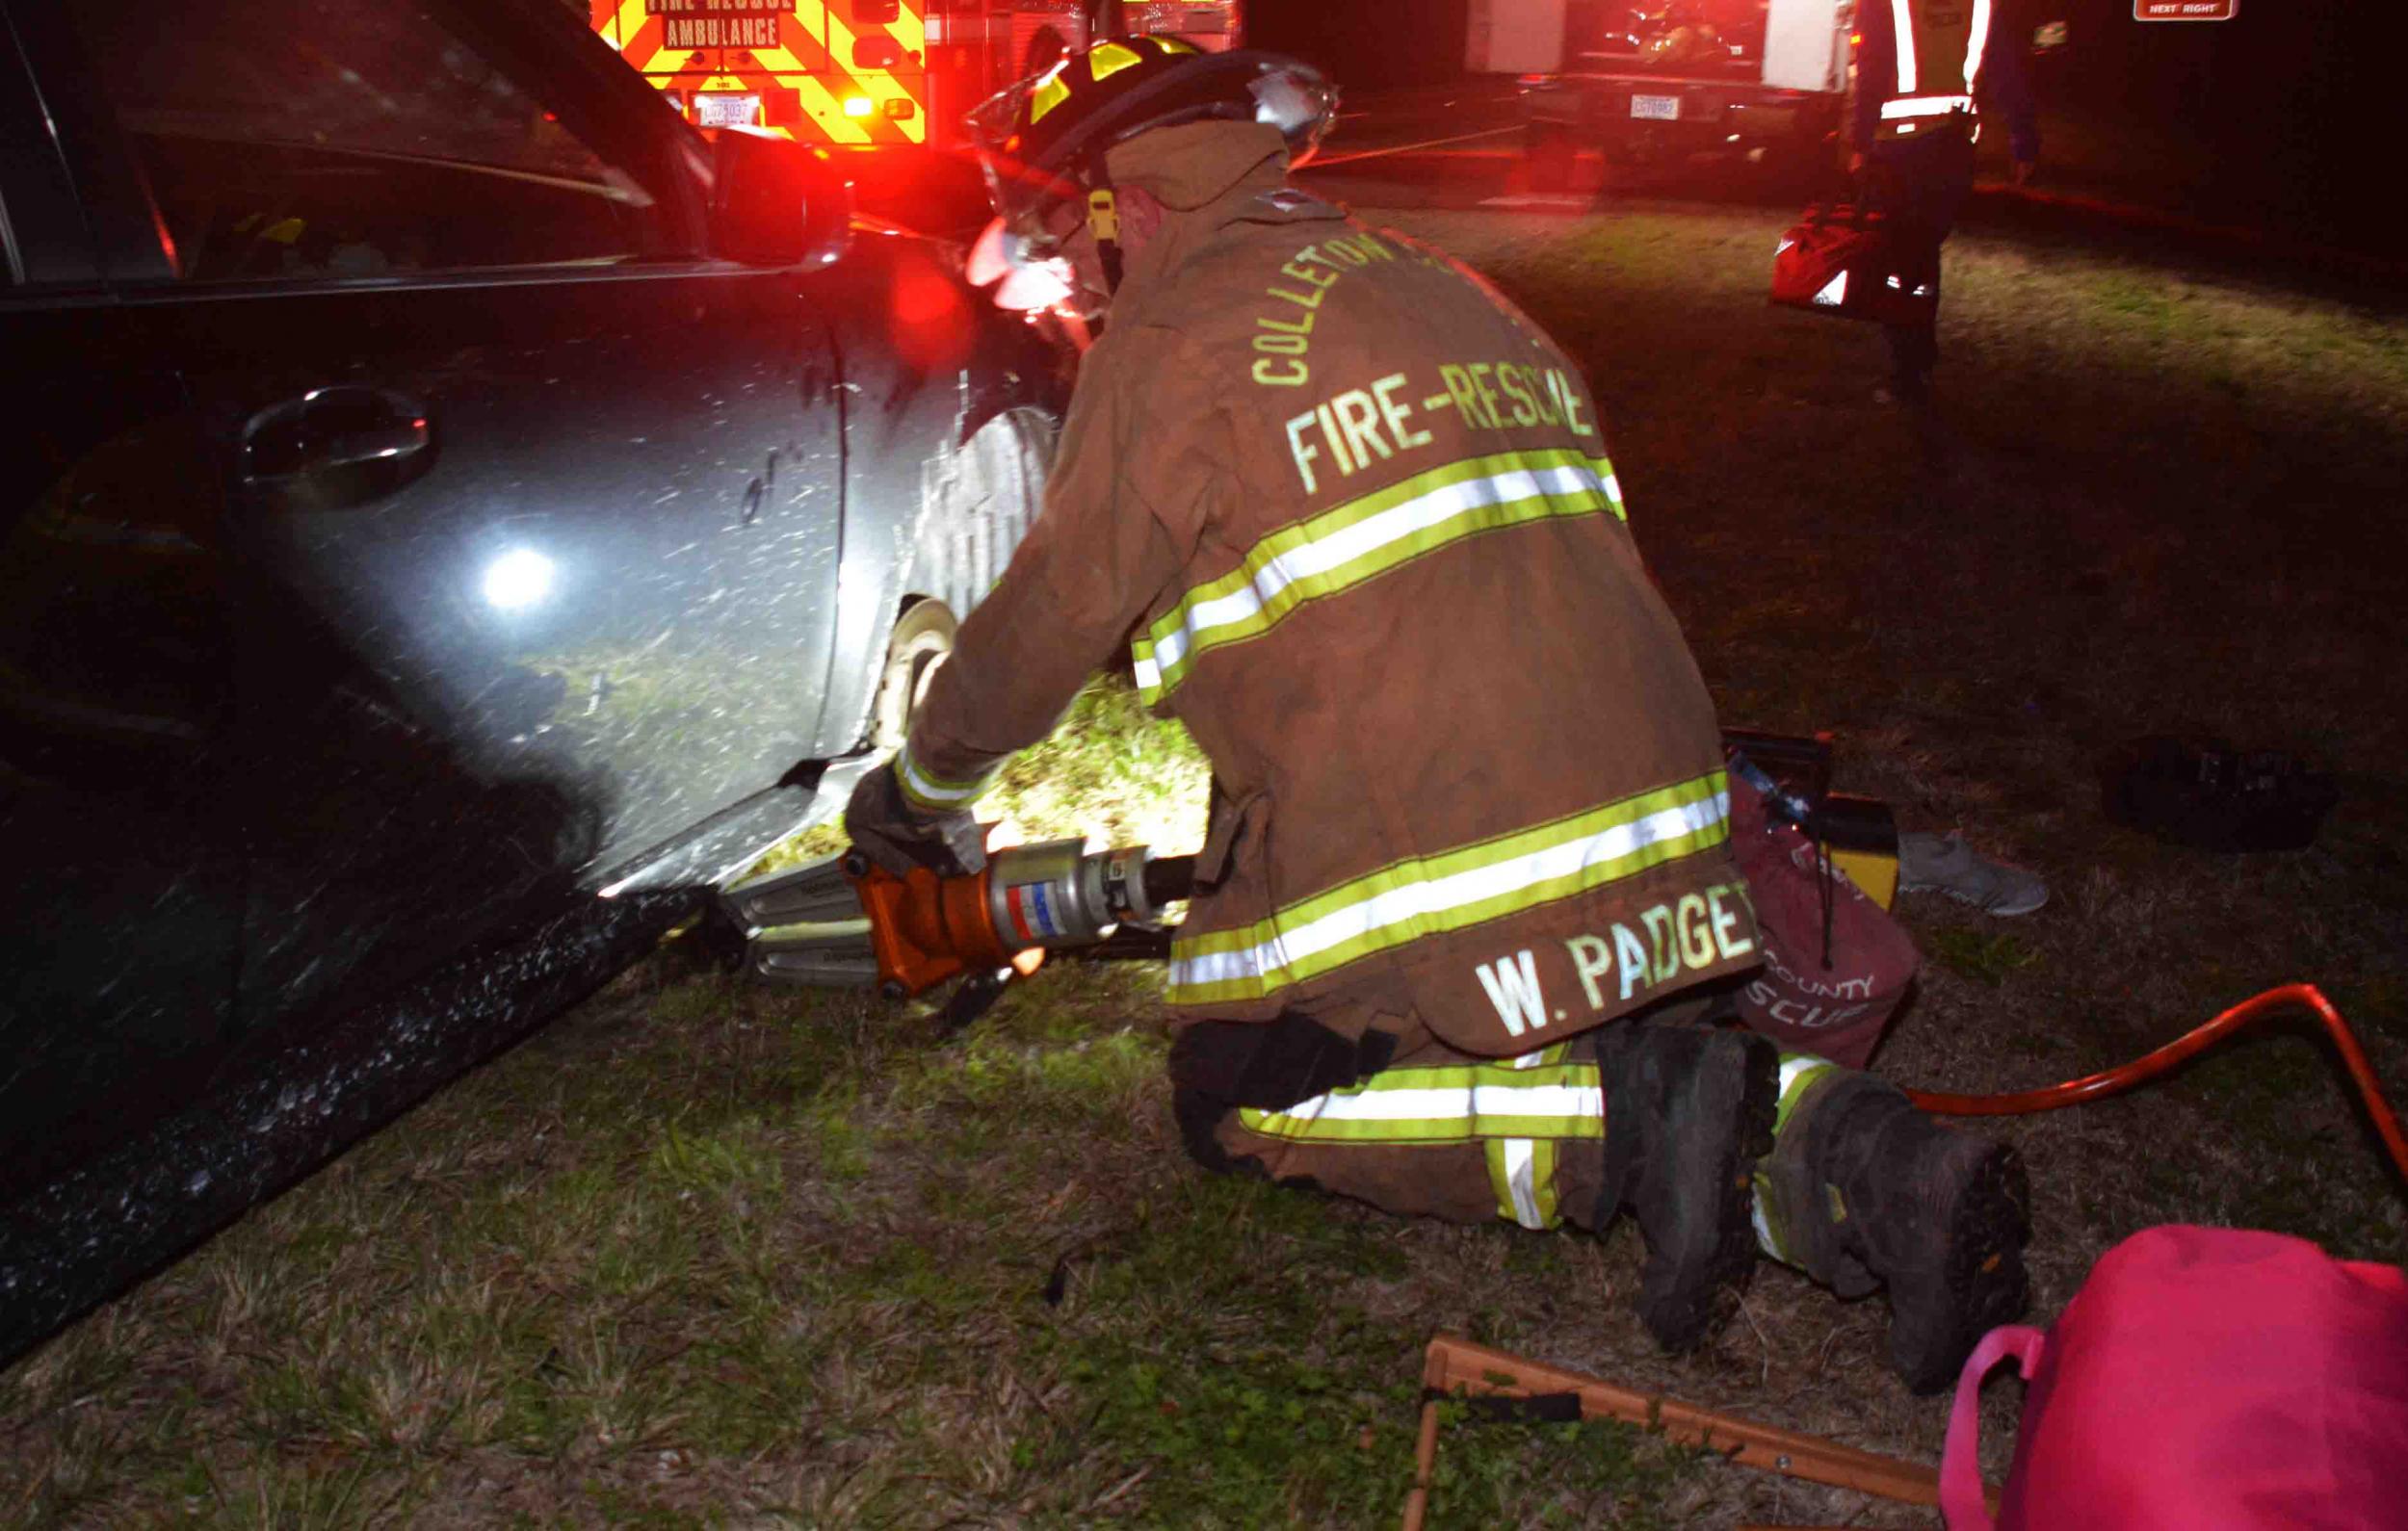 A firefighter uses a hydraulic tool to lift a car after a woman's hands were crushed while changing a tyre on 2 February, 2020, near North Charleston, South Carolina.